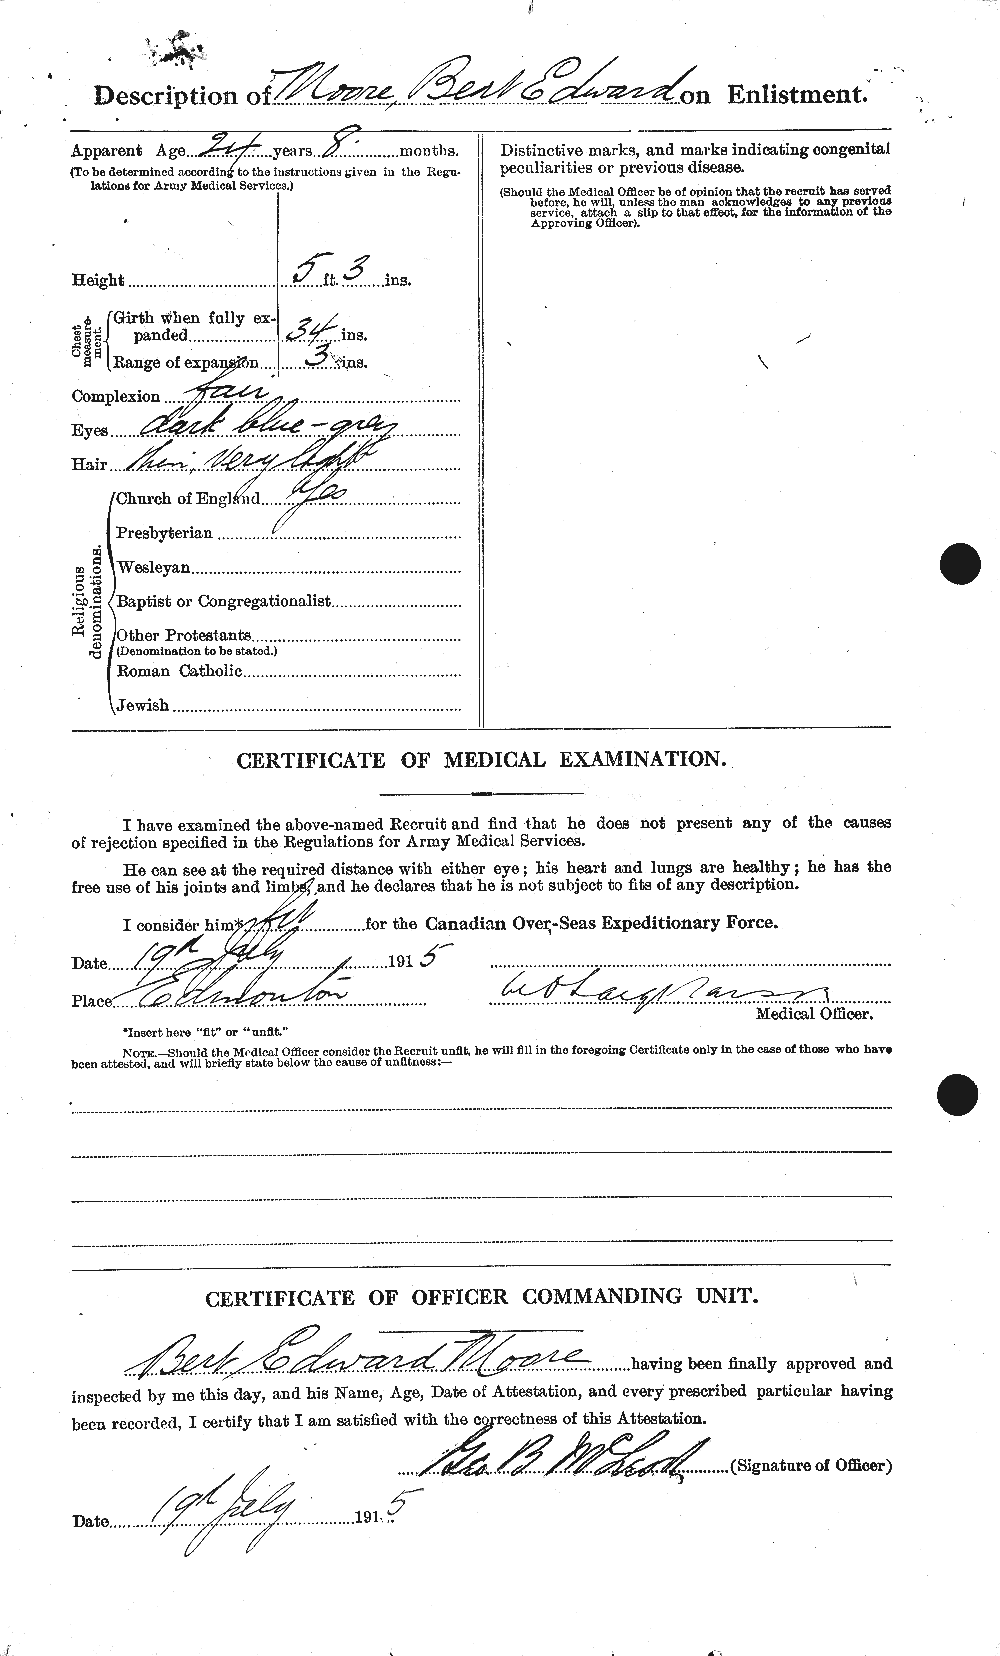 Personnel Records of the First World War - CEF 506464b